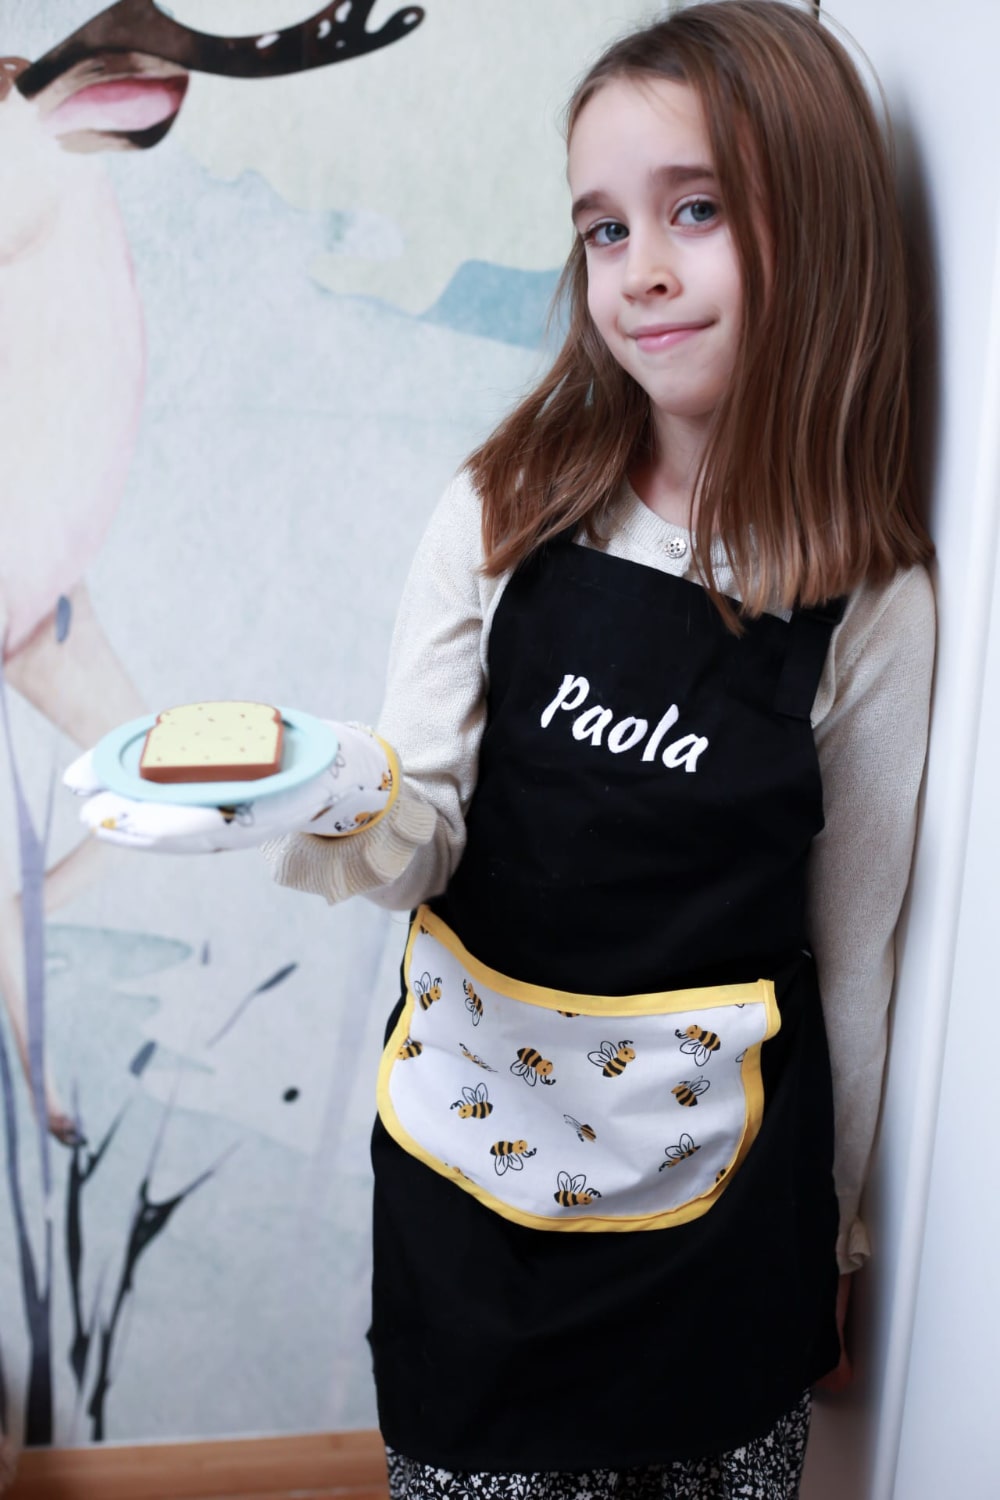 Young girl enjoying her personalized apron and oven mitt